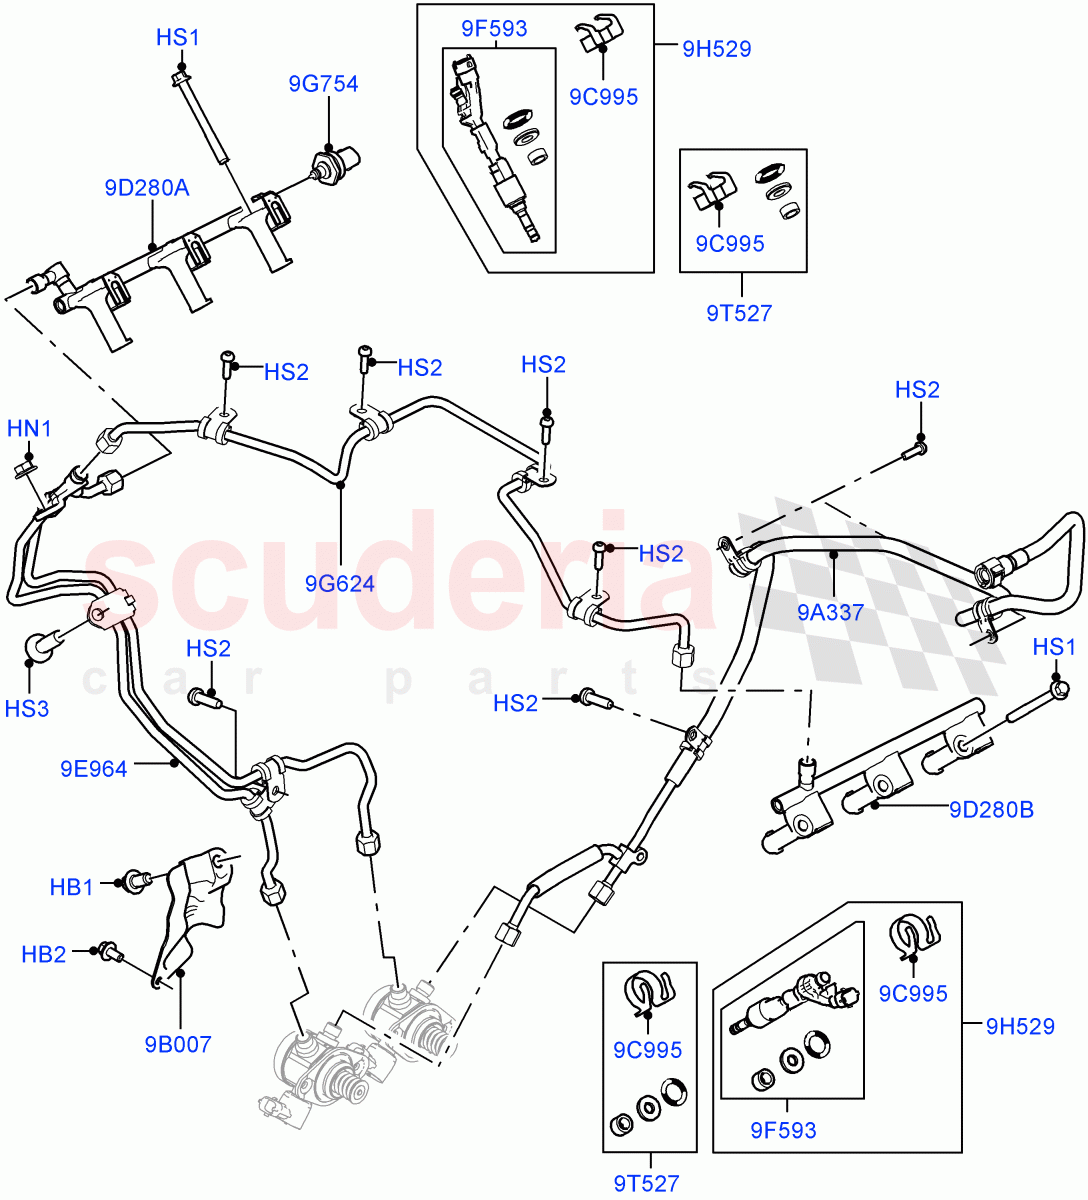 Fuel Injectors And Pipes(Solihull Plant Build)(3.0L DOHC GDI SC V6 PETROL)((V)FROMEA000001) of Land Rover Land Rover Range Rover (2012-2021) [3.0 DOHC GDI SC V6 Petrol]